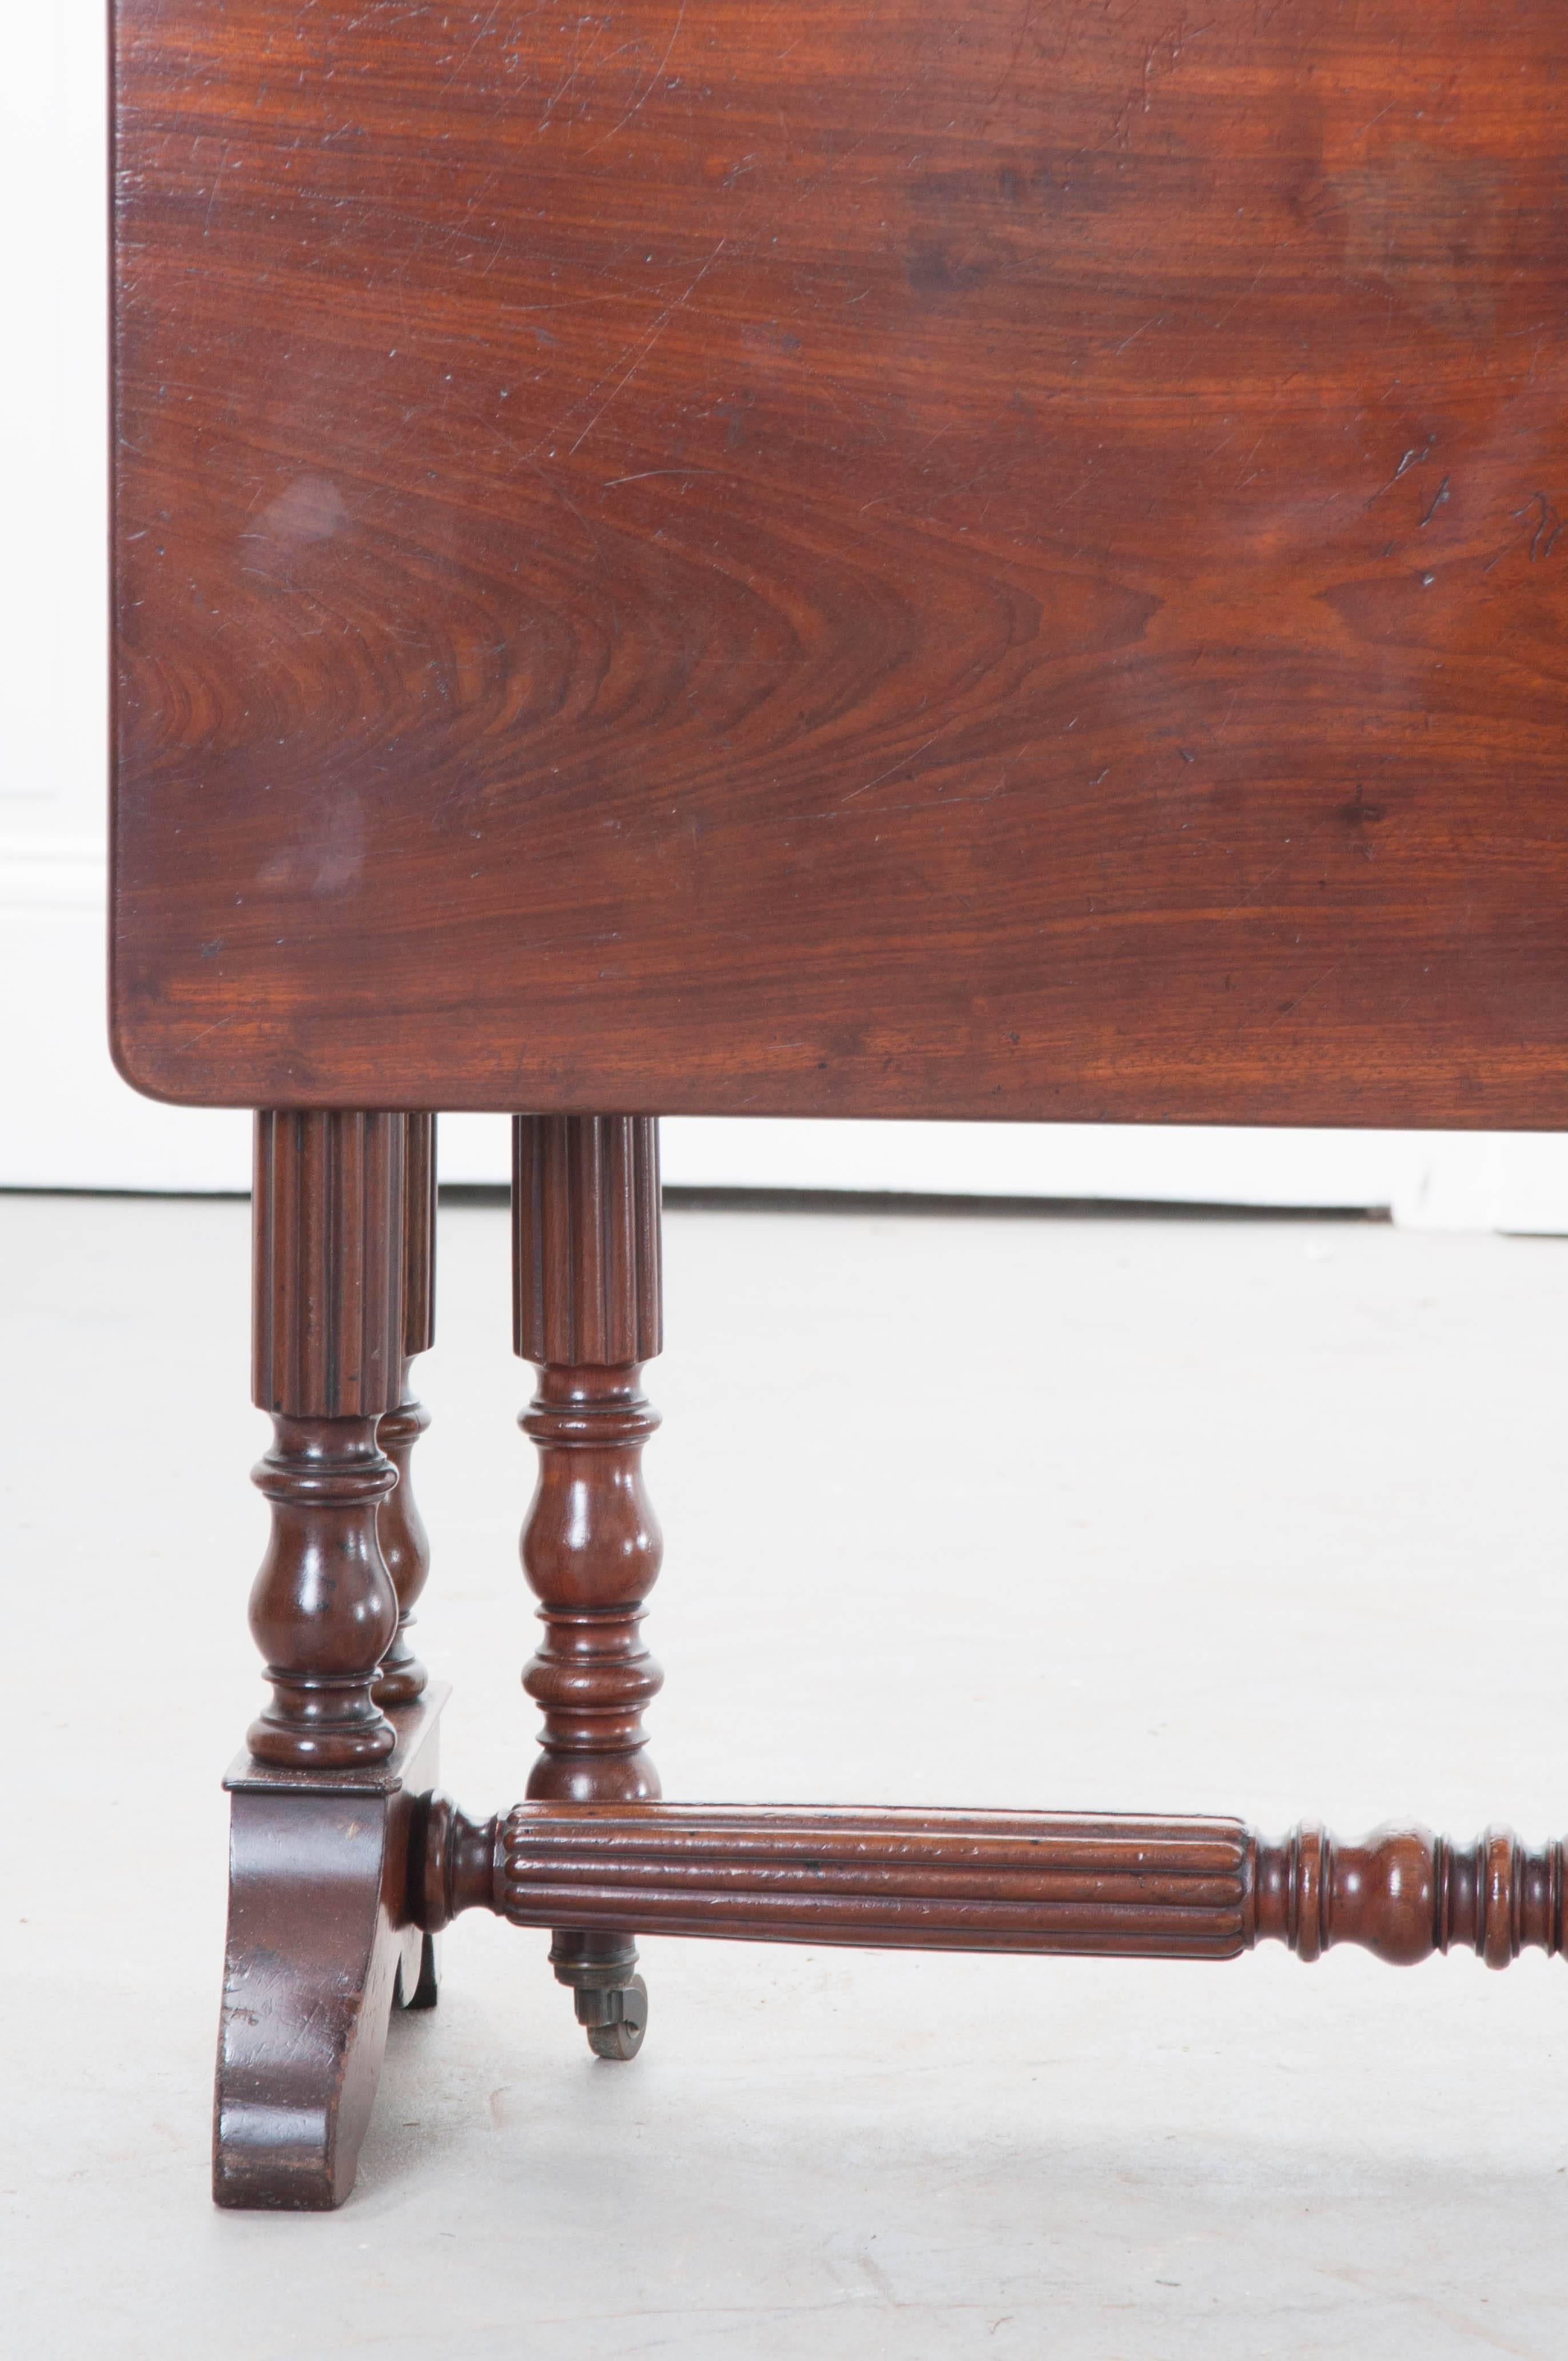 Rich mahogany was chosen to construct this handsome Regency drop-leaf table from 19th century, England. The table has beautifully styled legs that have been turned and finished with a reeded motif. The two legs that swing to support the top, when